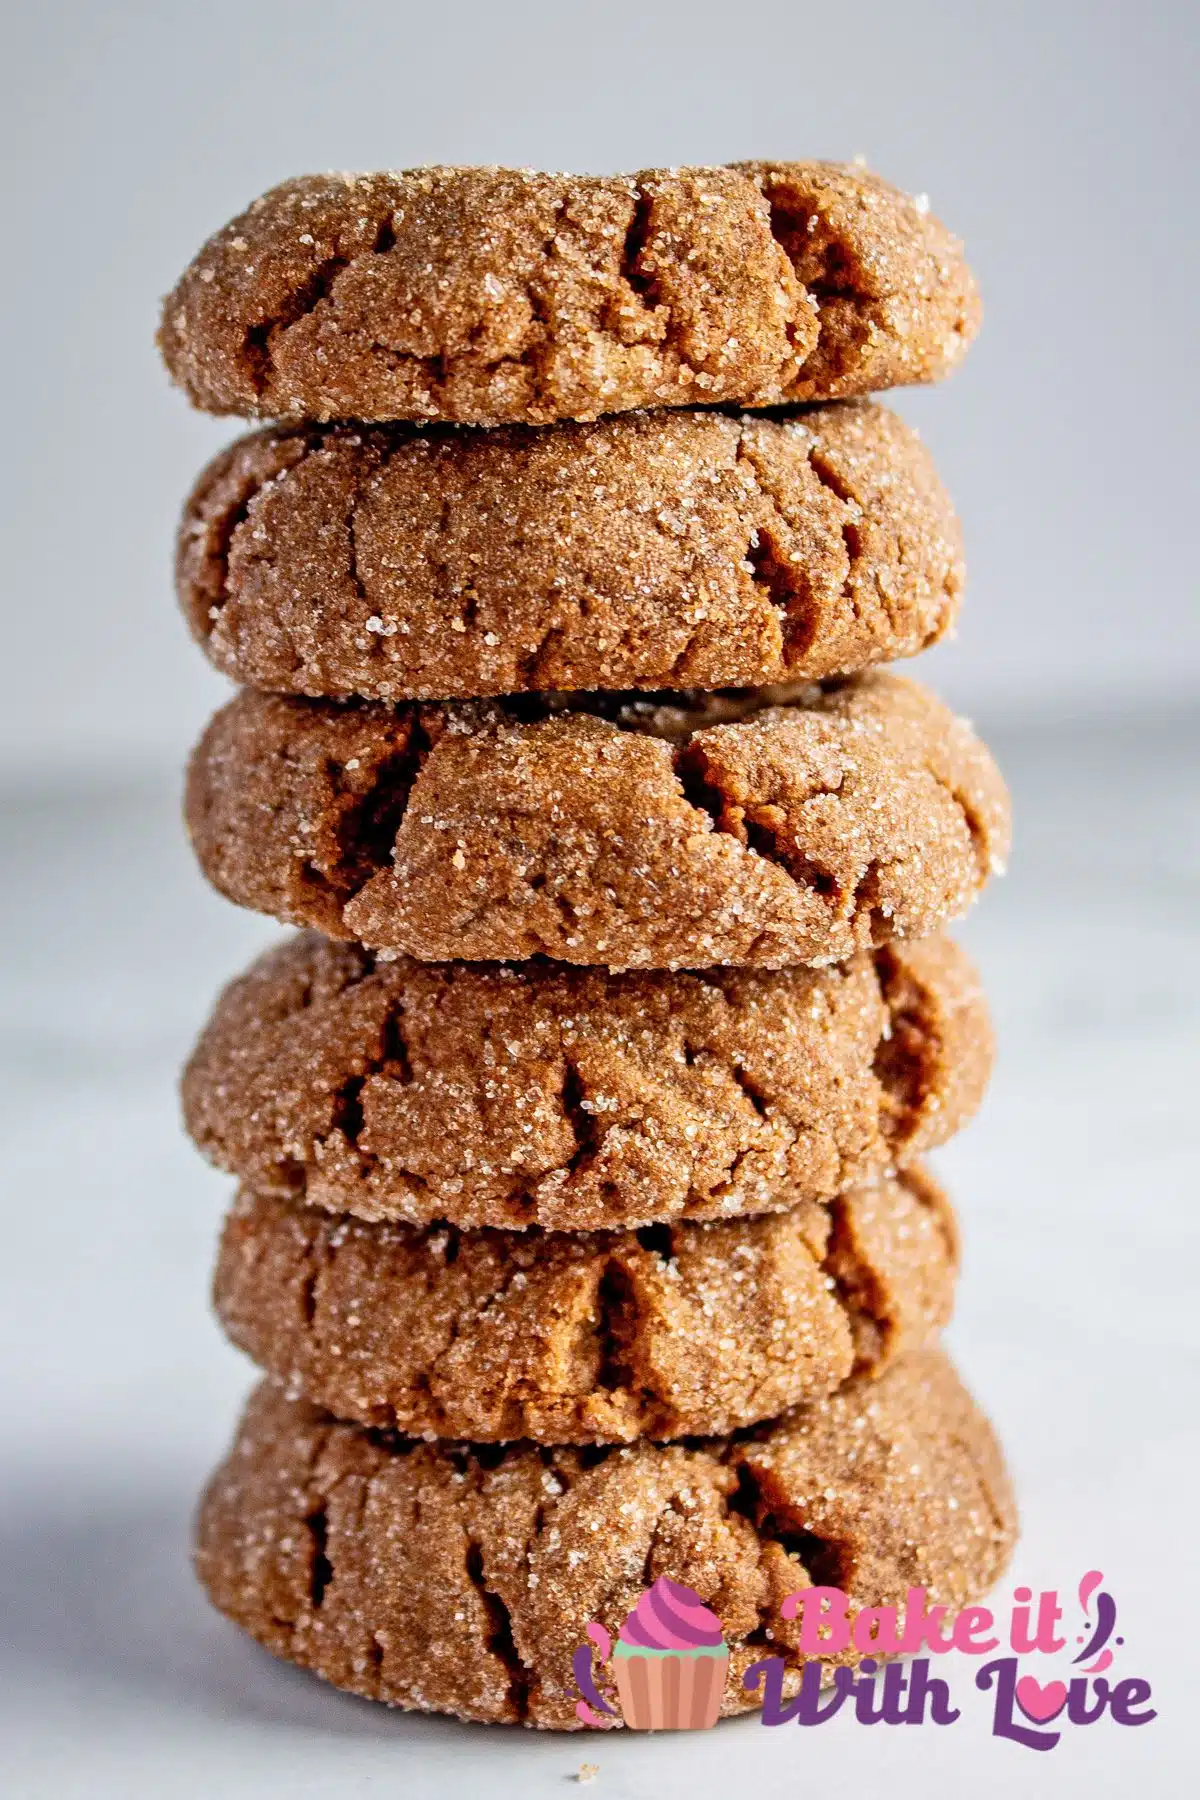 Tall closeup image of the baked chocolate peanut butter cookies stacked 5 cookies high on light grey marble background.